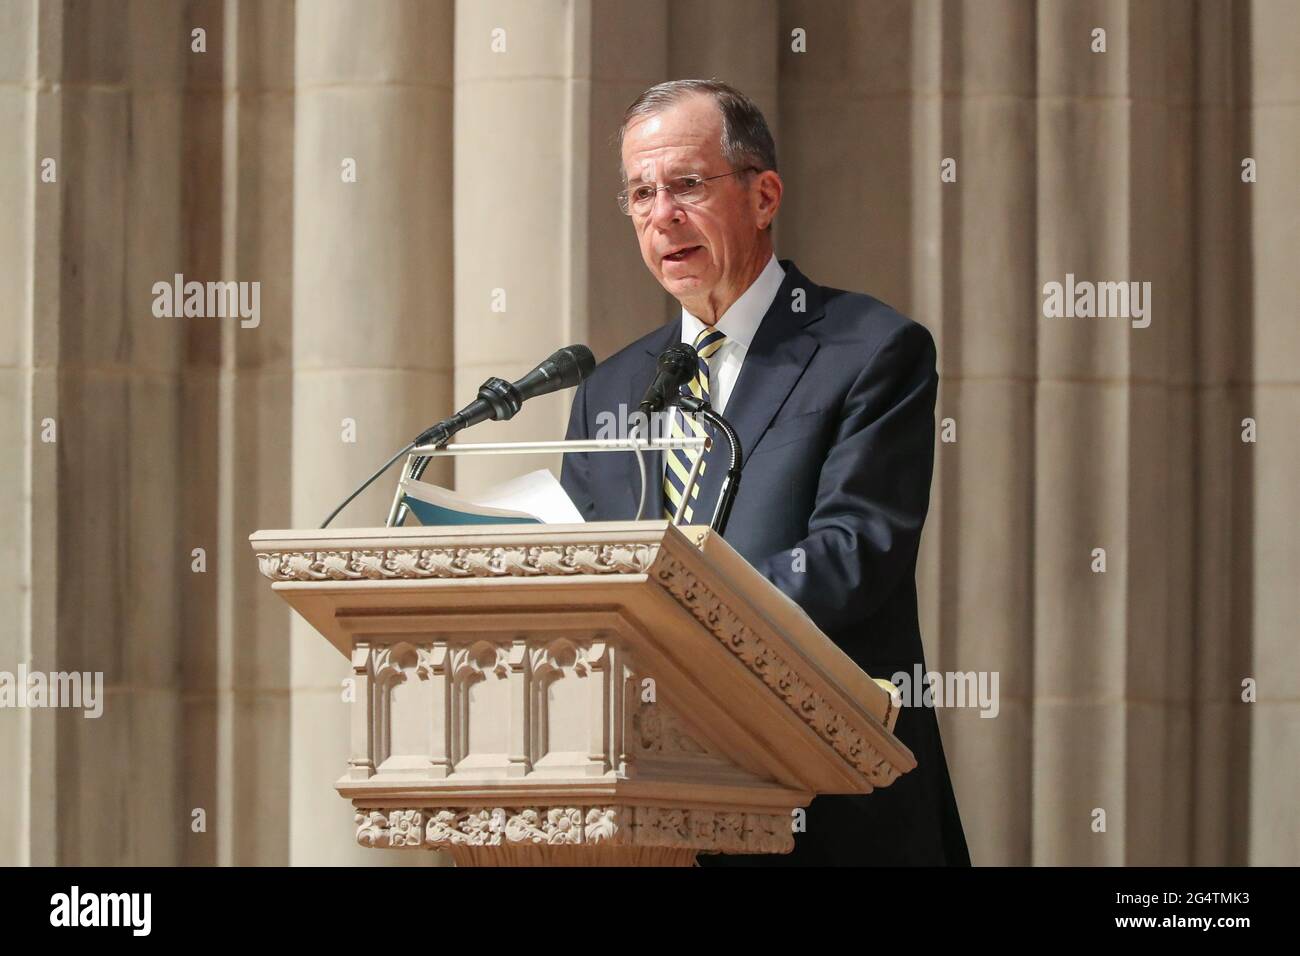 United States Navy Admiral Michael G. Mullen, retired, speaks during the funeral ceremony of former Senator John Warner at Washington National Cathedral in Washington, DC, U.S. June 23, 2021. Oliver Contreras/Pool via REUTERS Stock Photo